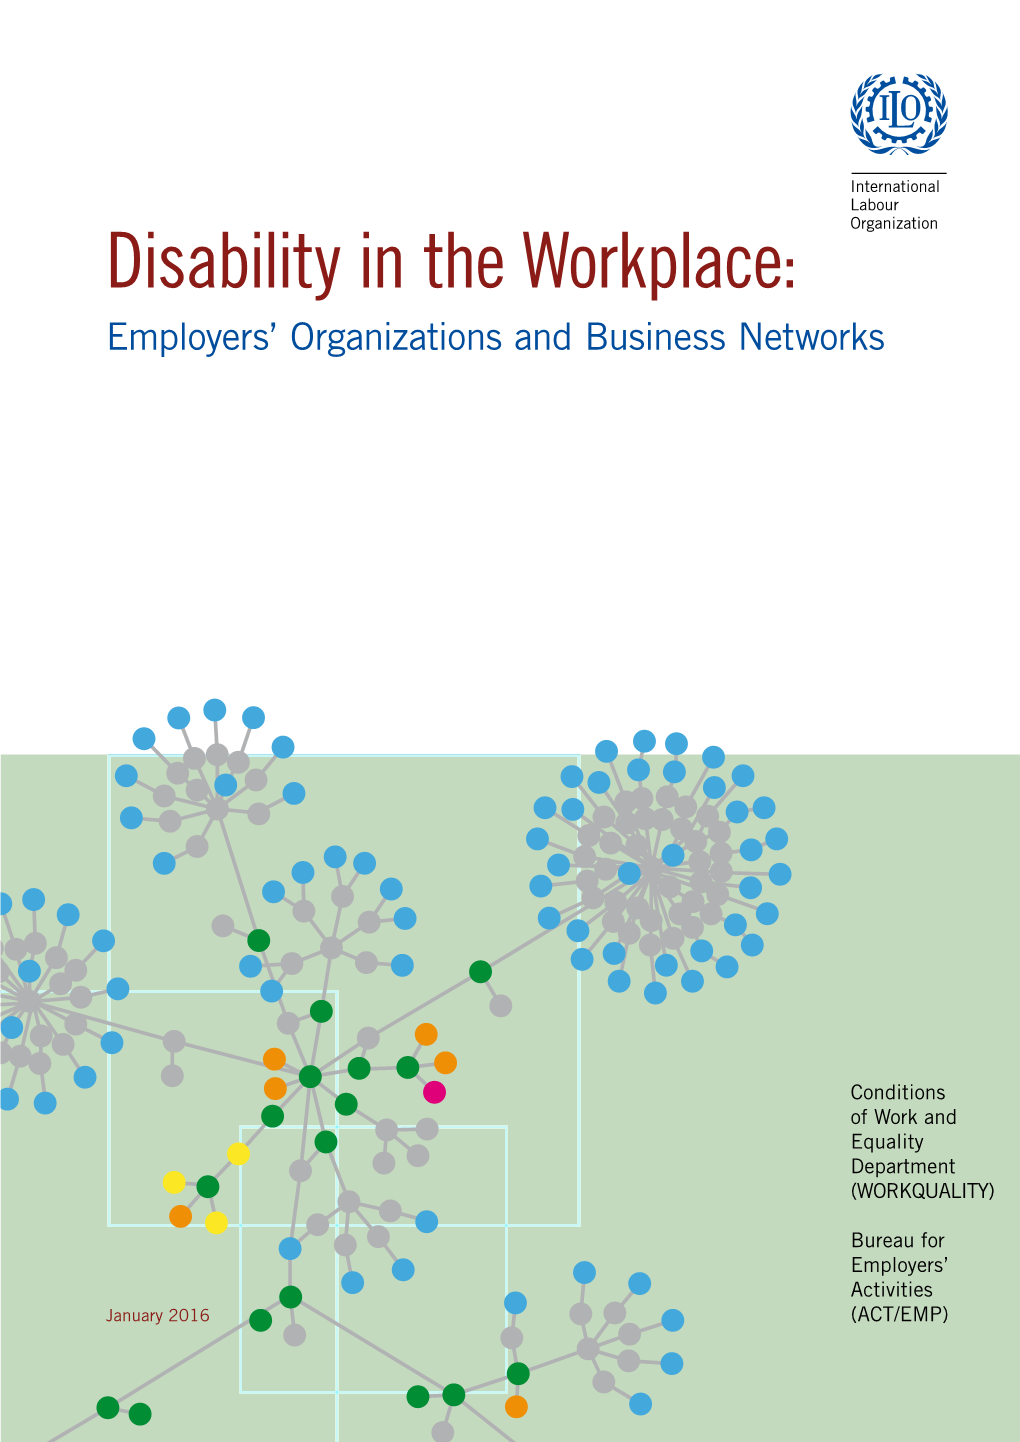 Disability in the Workplace: Employers' Organizations and Business